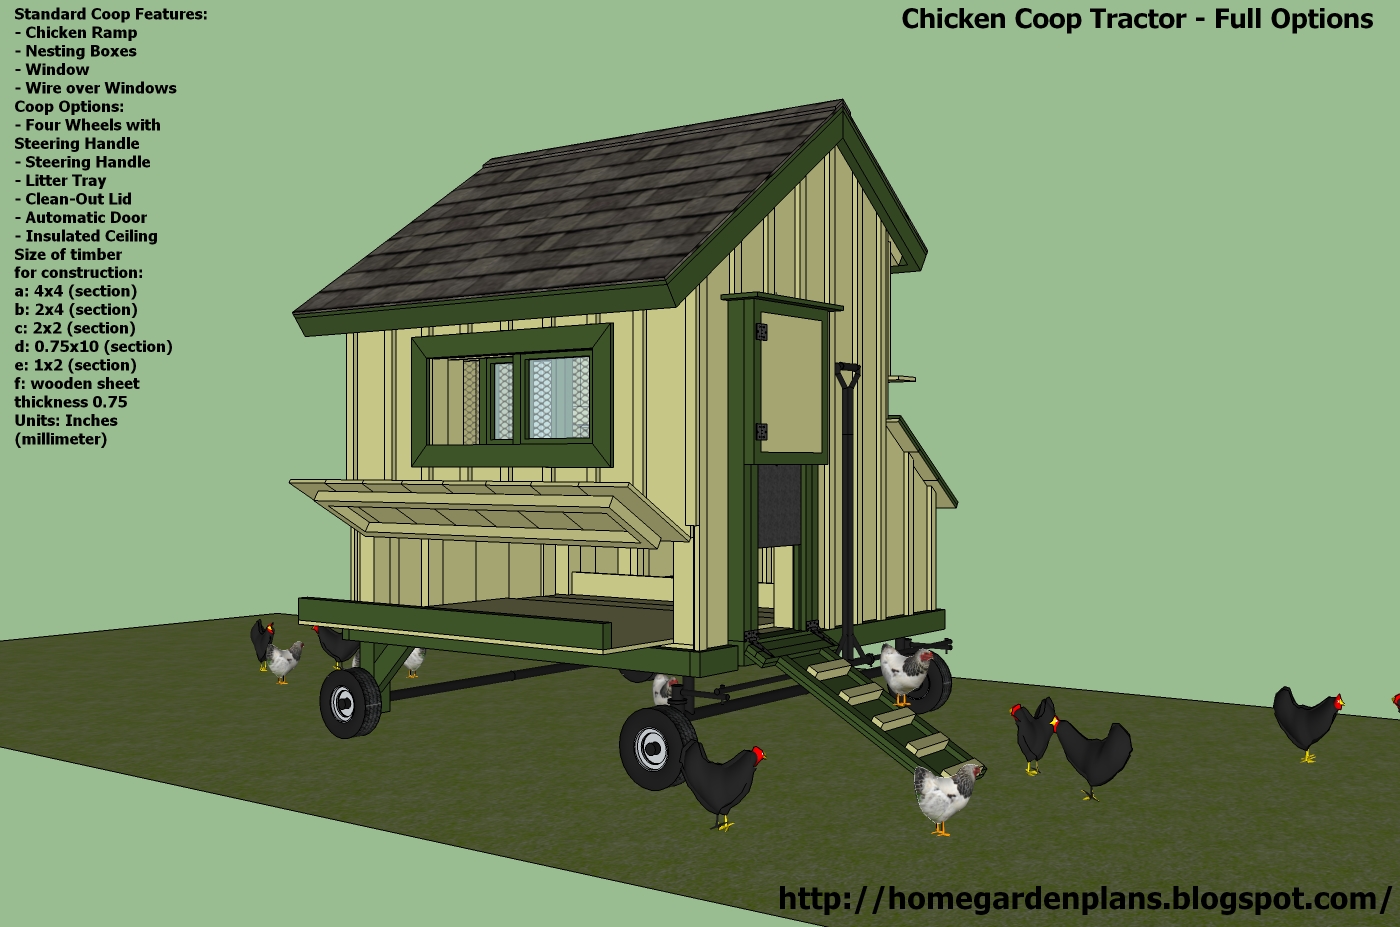  Build Chicken Coop Plans, Save Money And No Special Tools Required